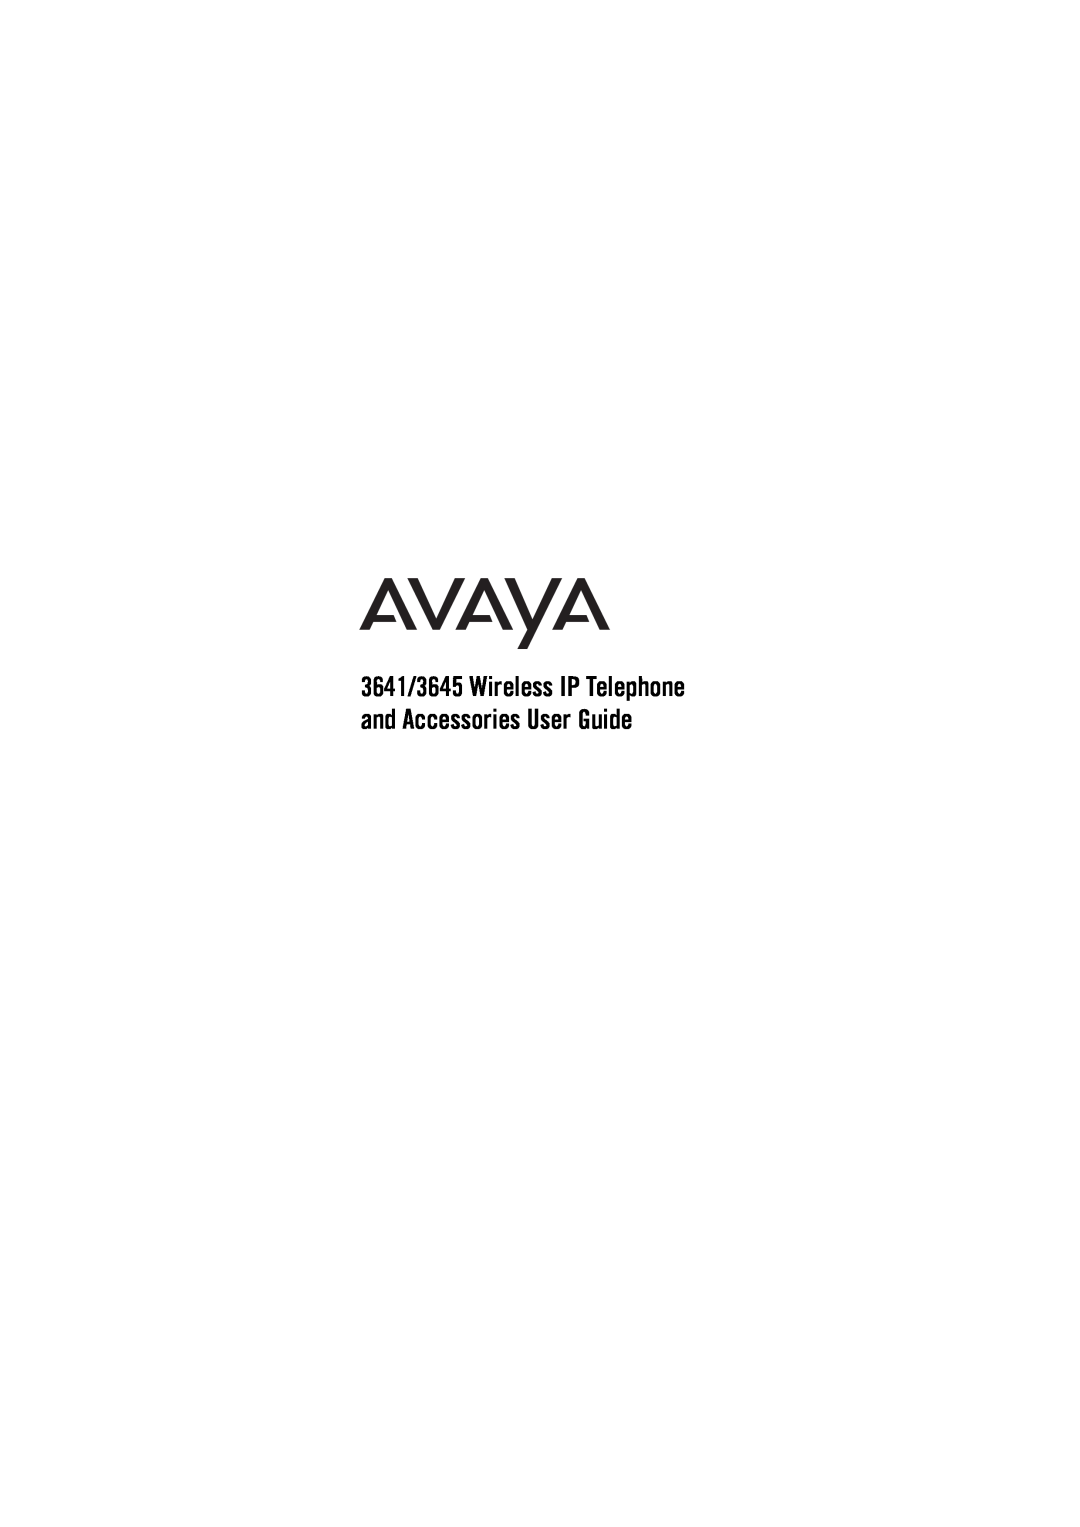 Avaya manual 3641/3645 Wireless IP Telephone and Accessories User Guide 